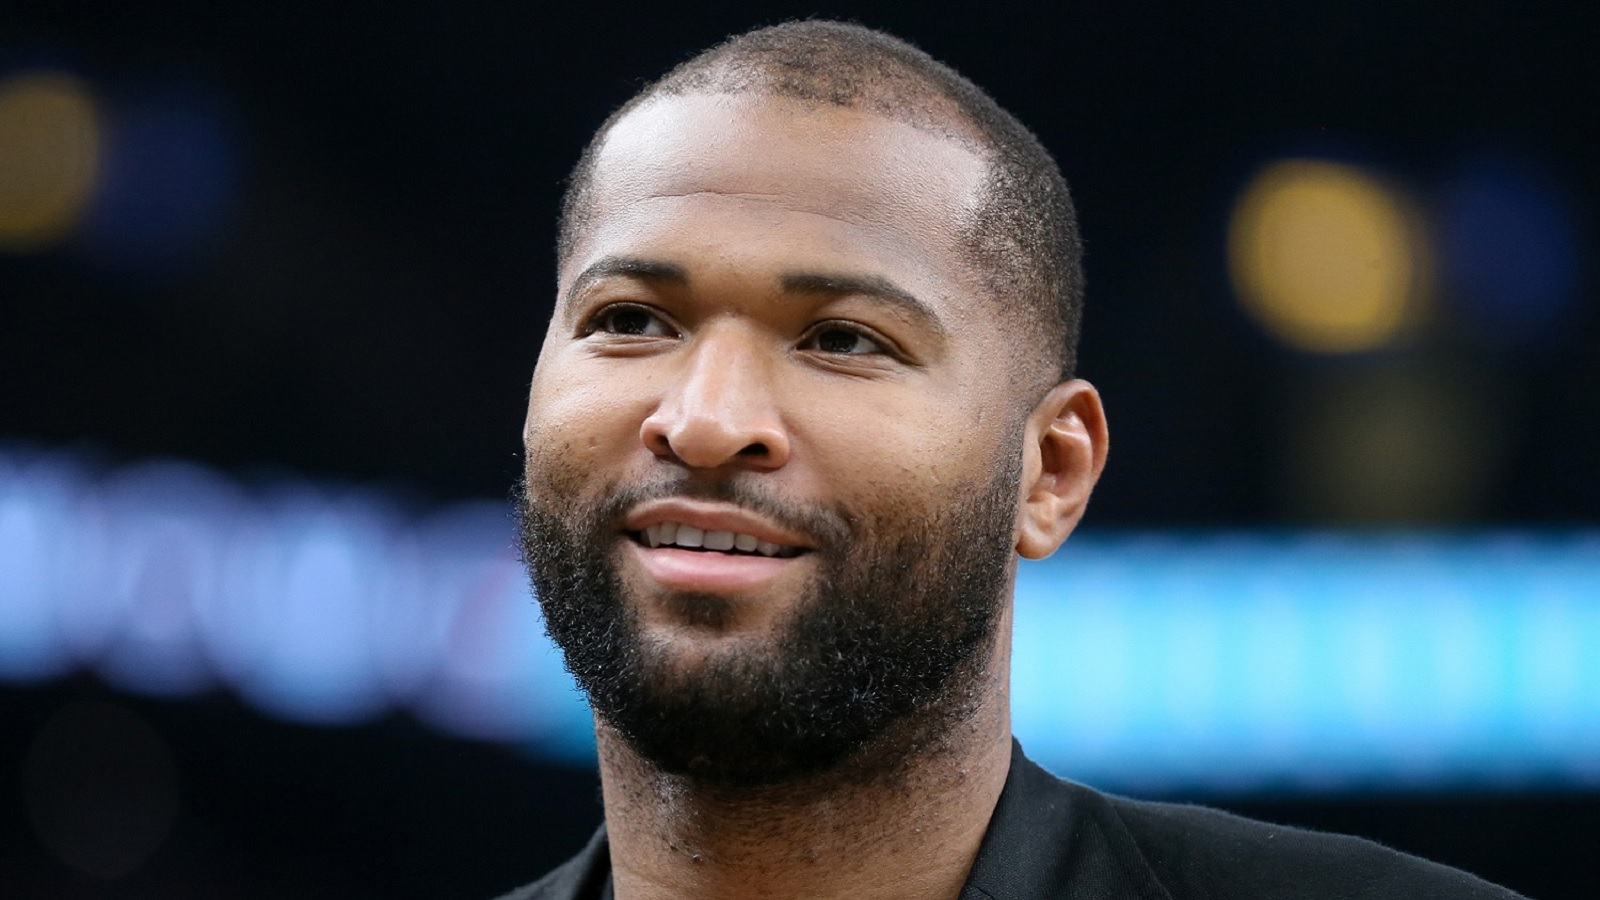 Former NBA star DeMarcus Cousins to reportedly join Taiwan's T1 League, Taiwan News